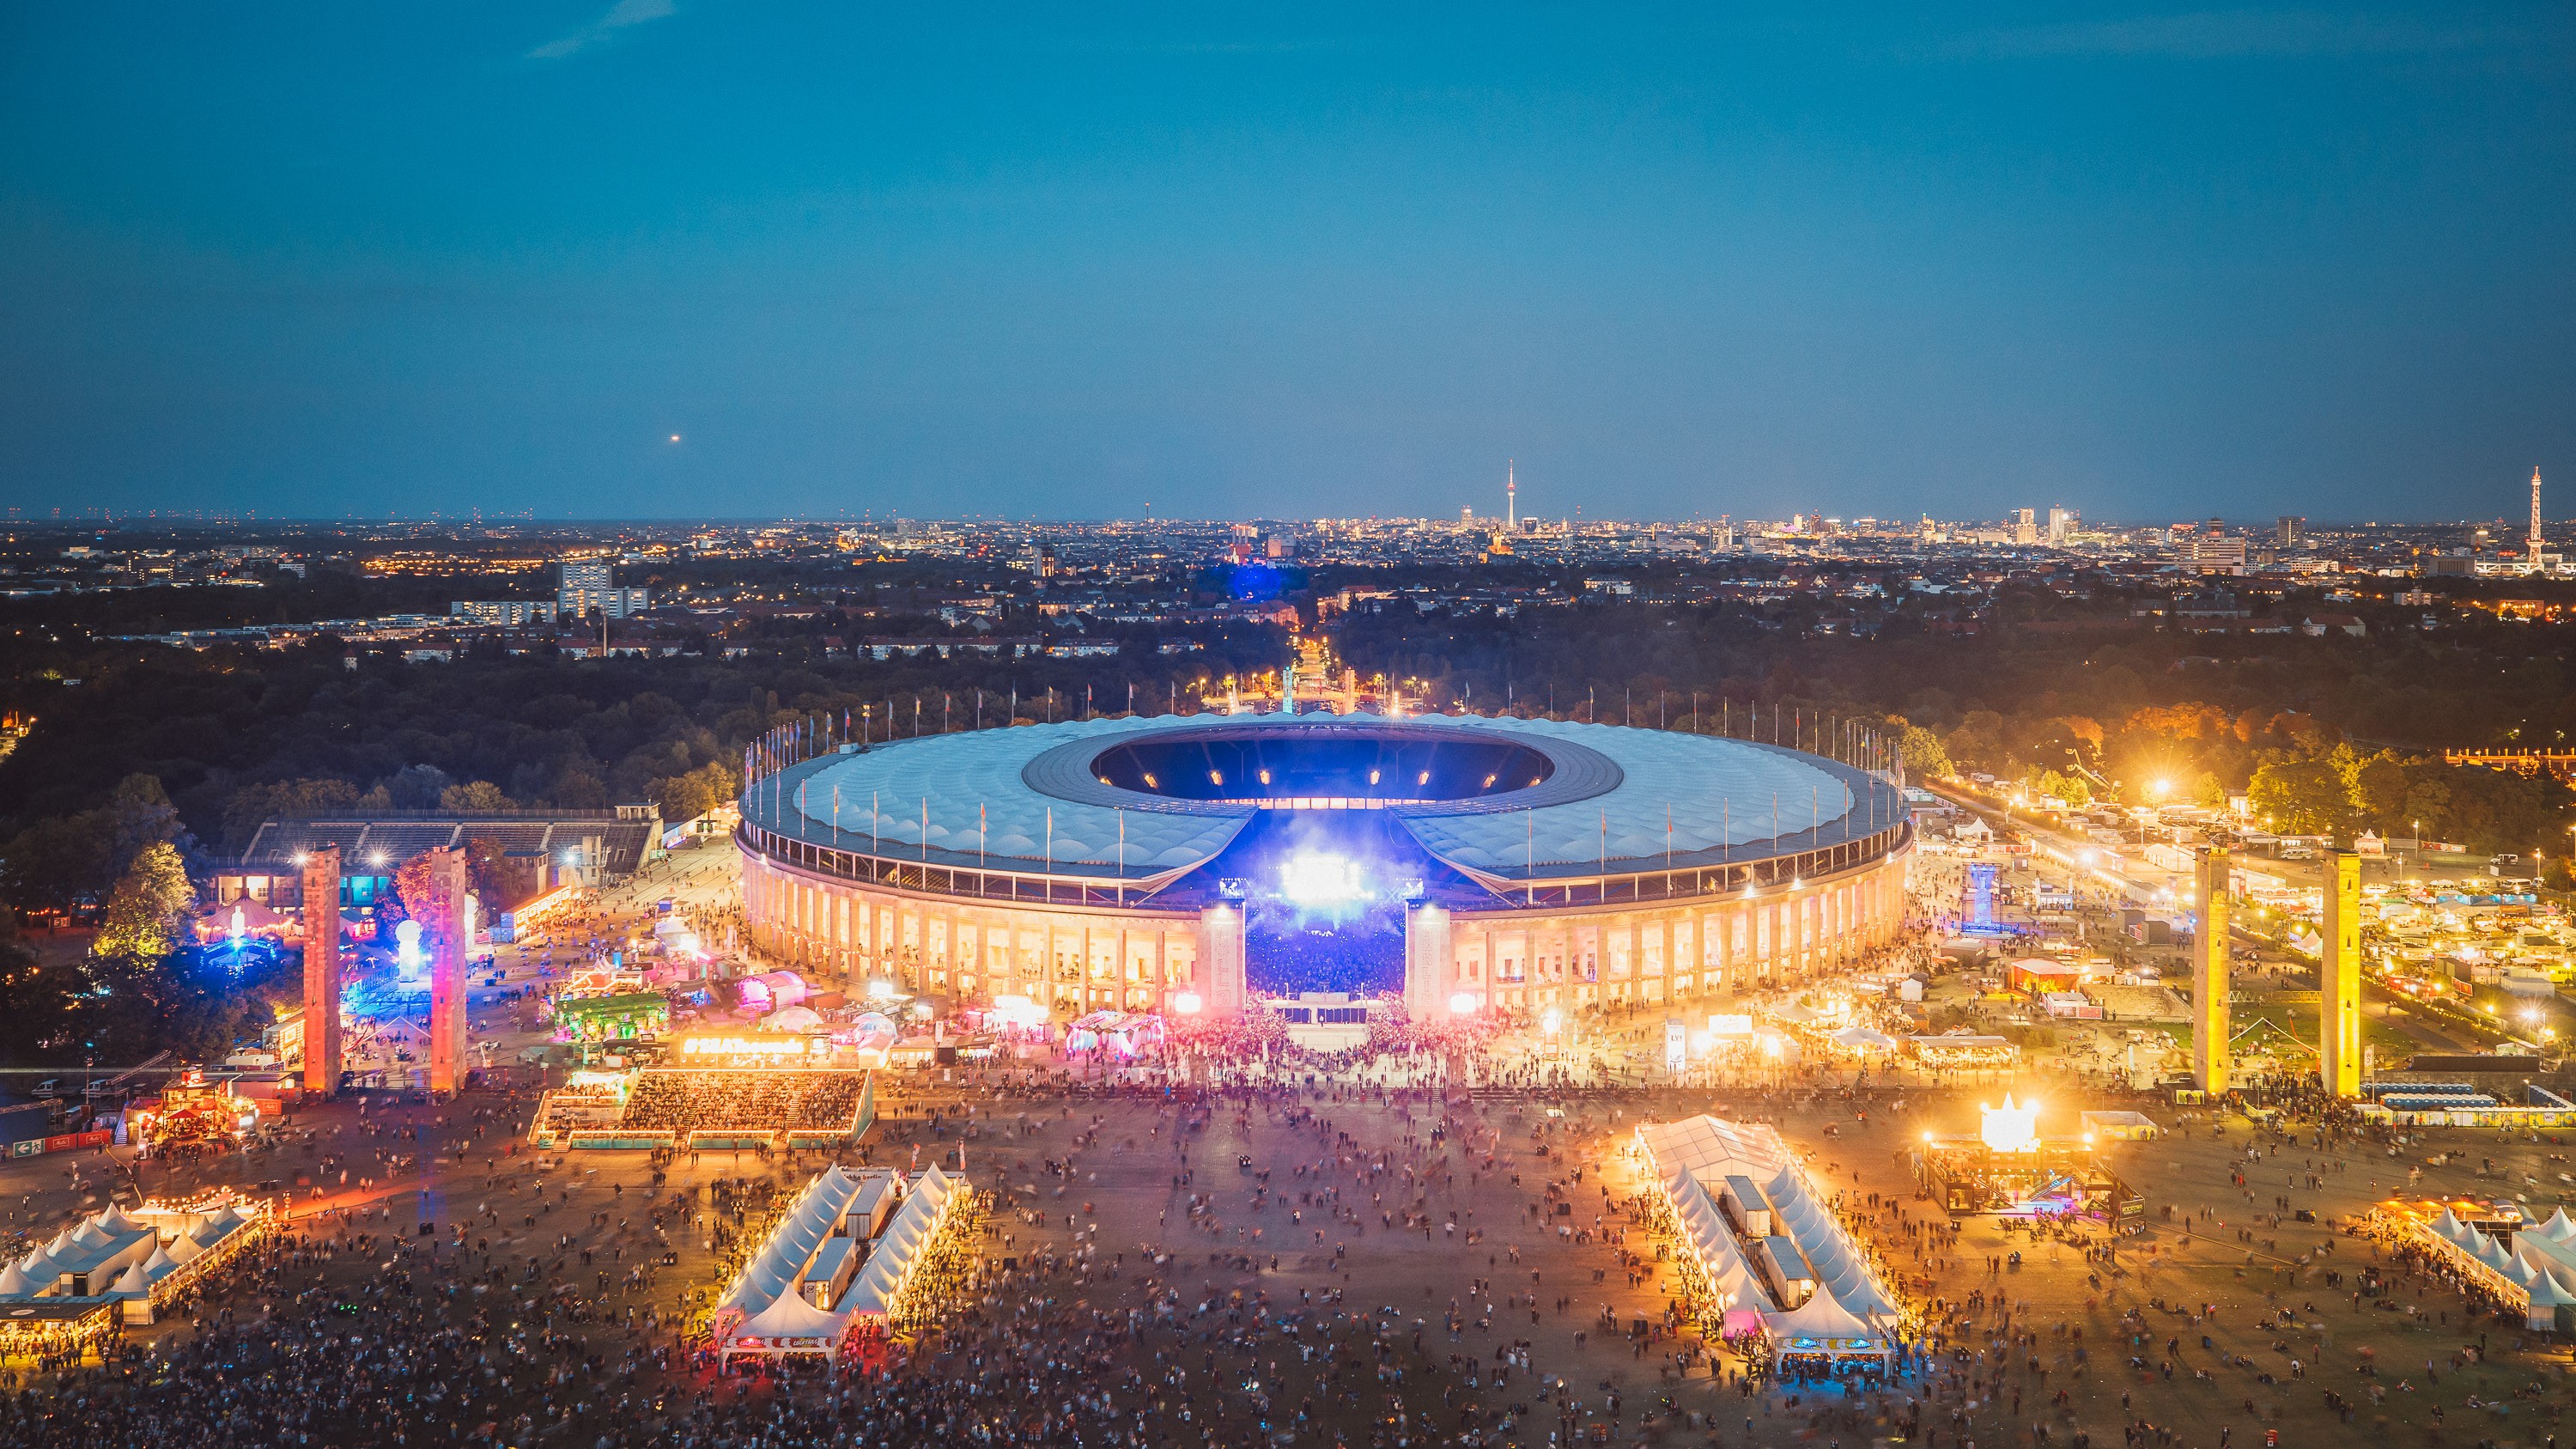 In pictures why we will return to Lollapalooza Berlin